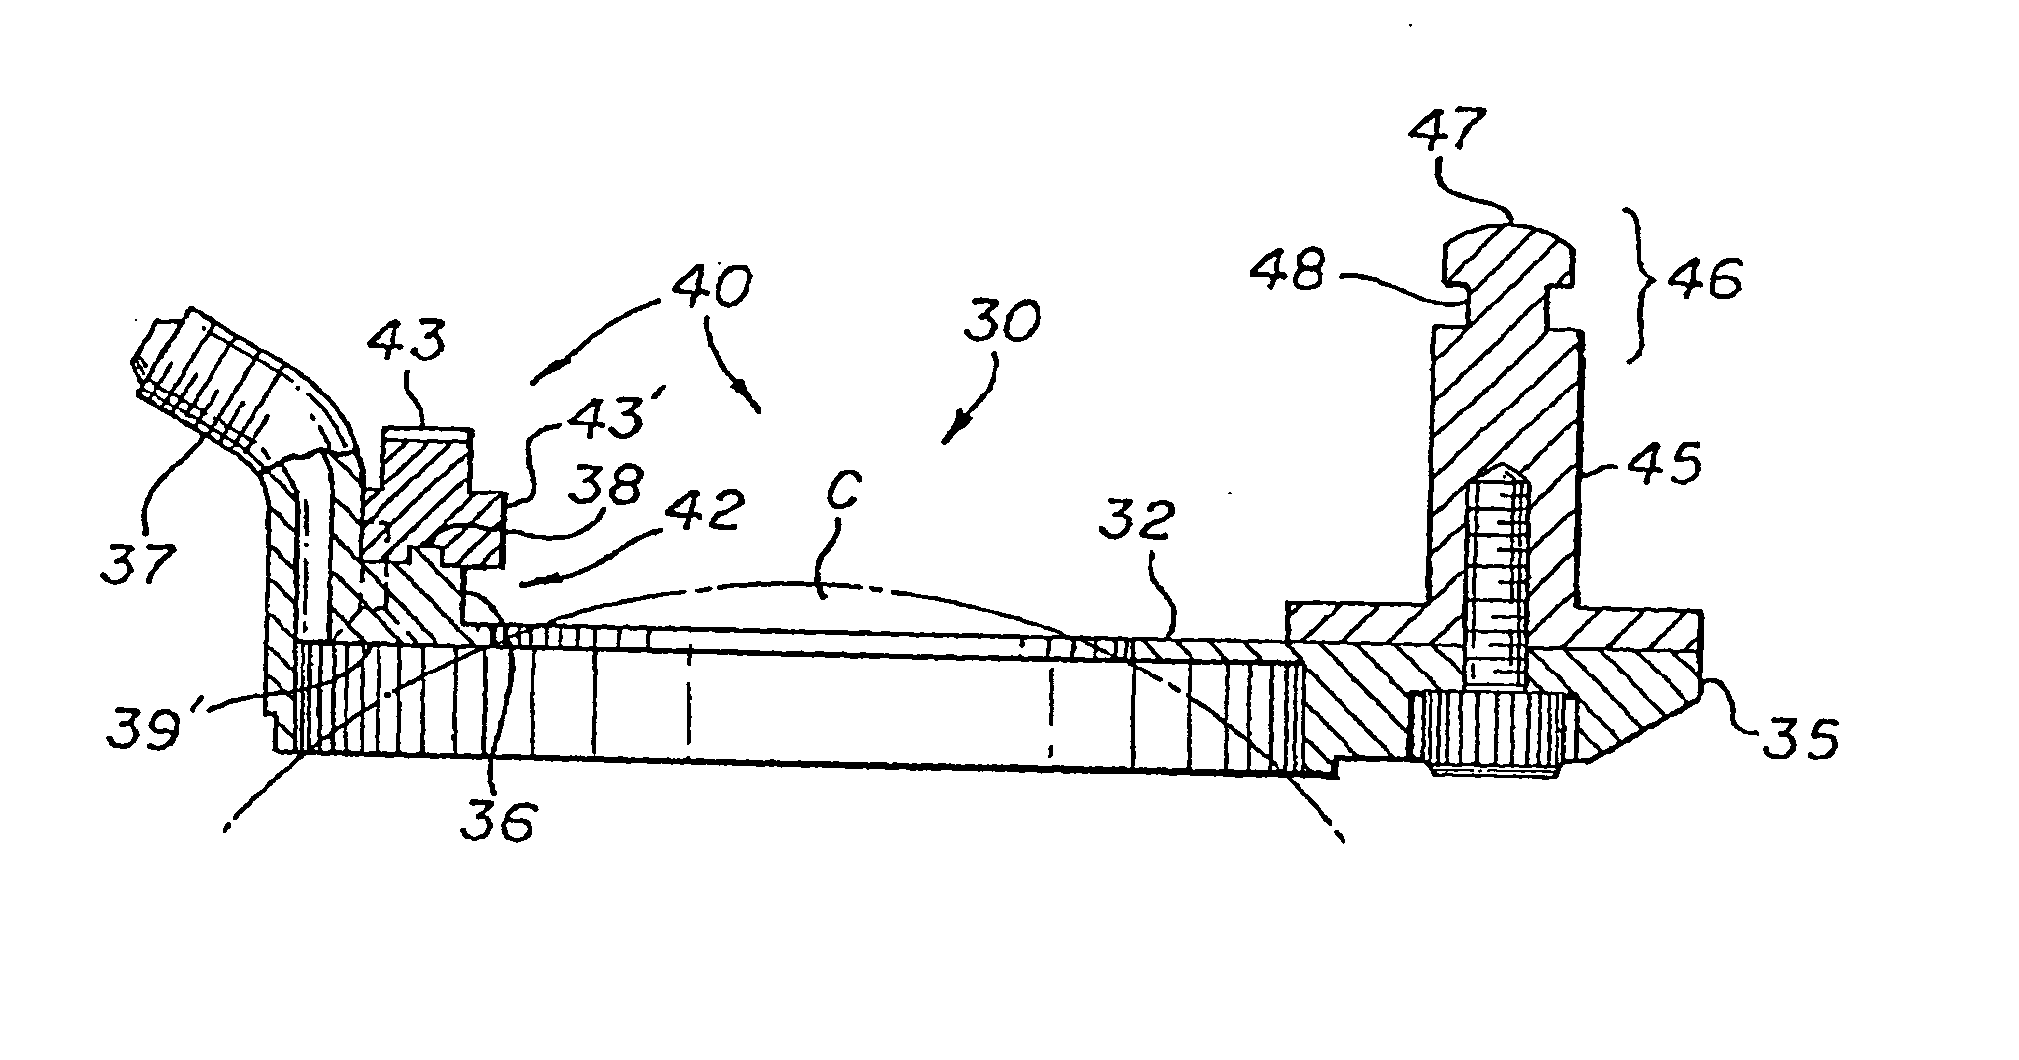 Automatic surgical device and control assembly for cutting a cornea